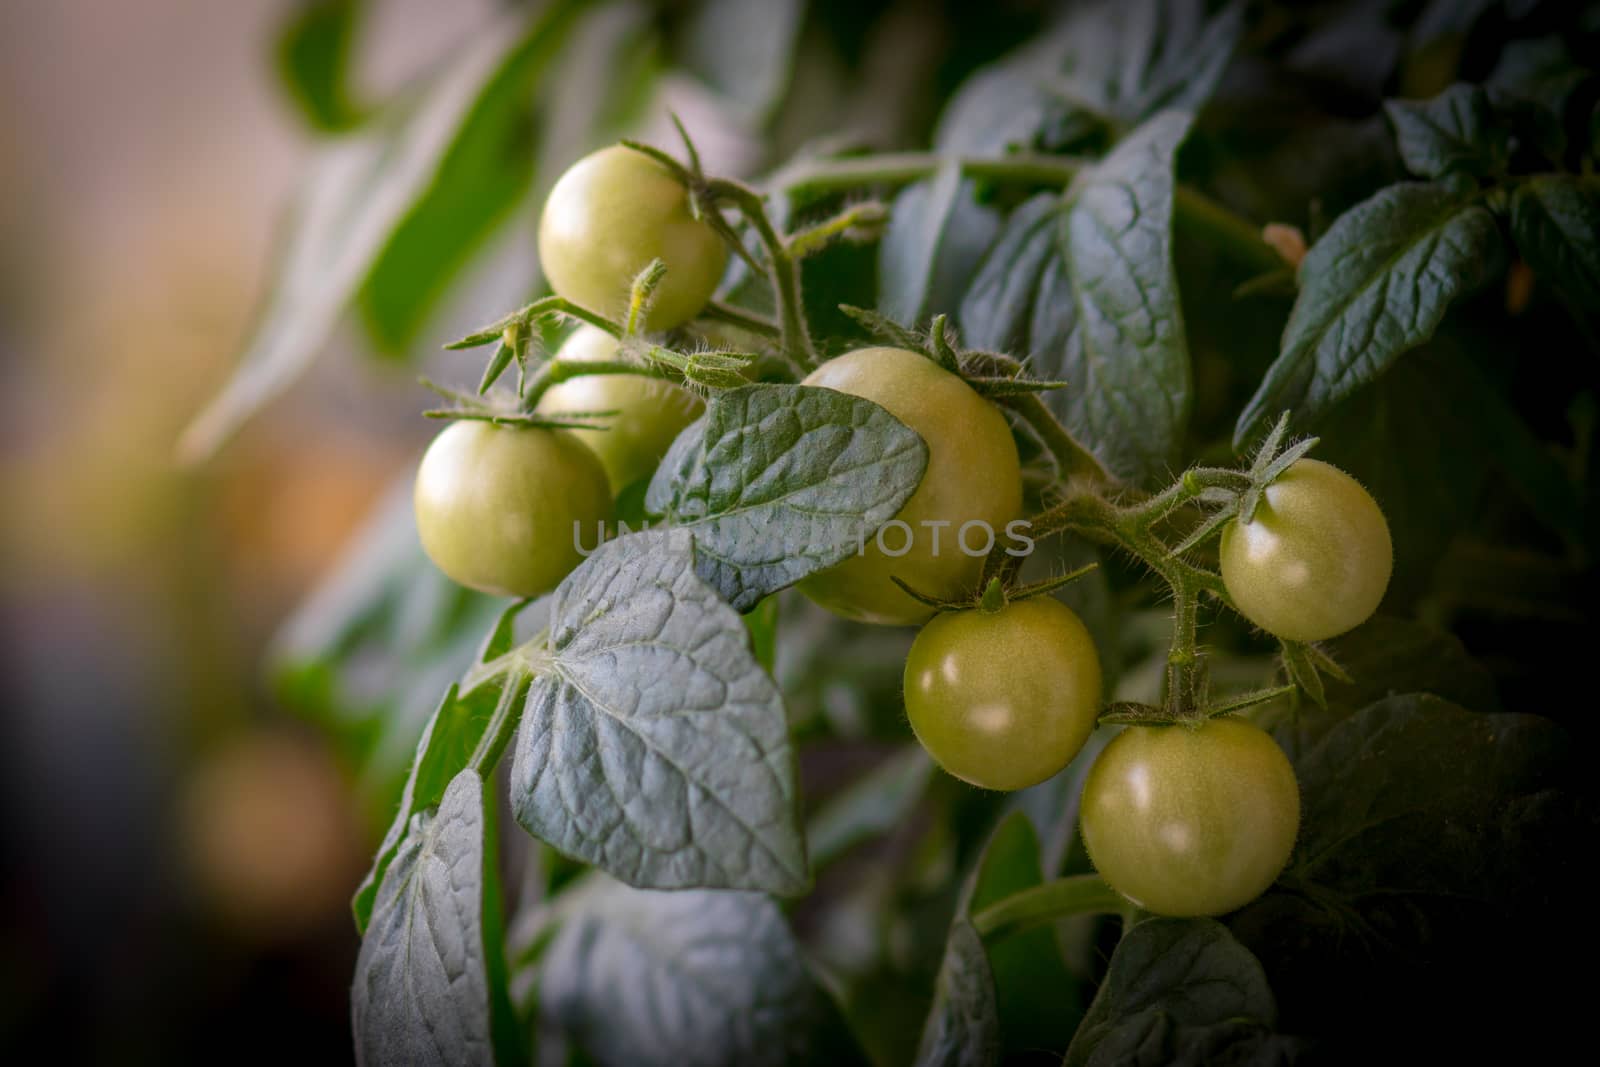 A branch with unripe green tomatoes. Green unripe tomatoes close-up.